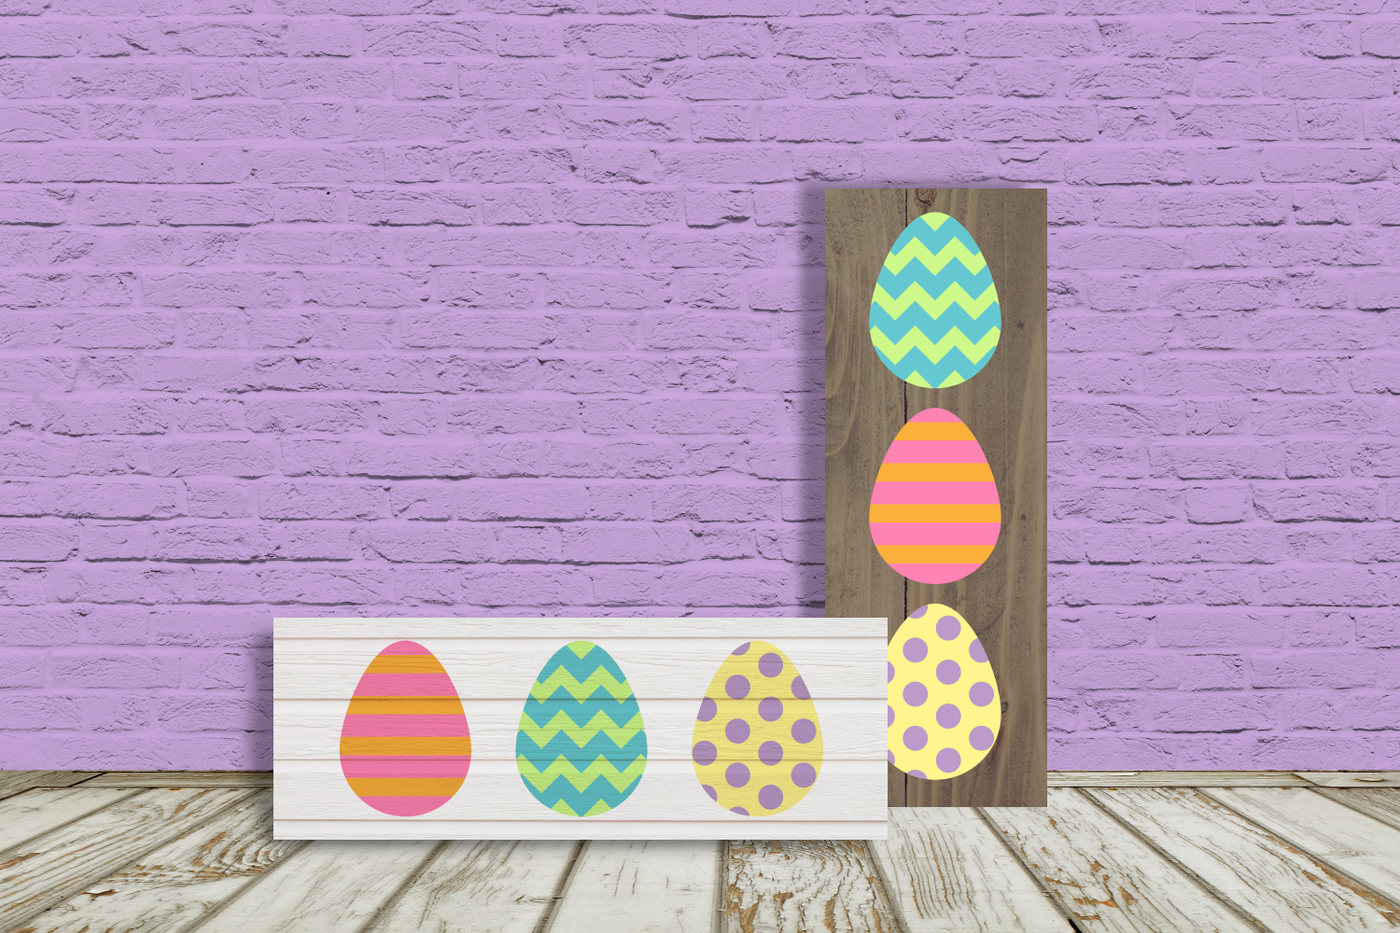 Two porch signs lay against a wall. One is vertical, the other is horizontal. Each is decorated with 3 Easter eggs. One egg has a chevron pattern, one has a striped pattern, and one has polka dots.